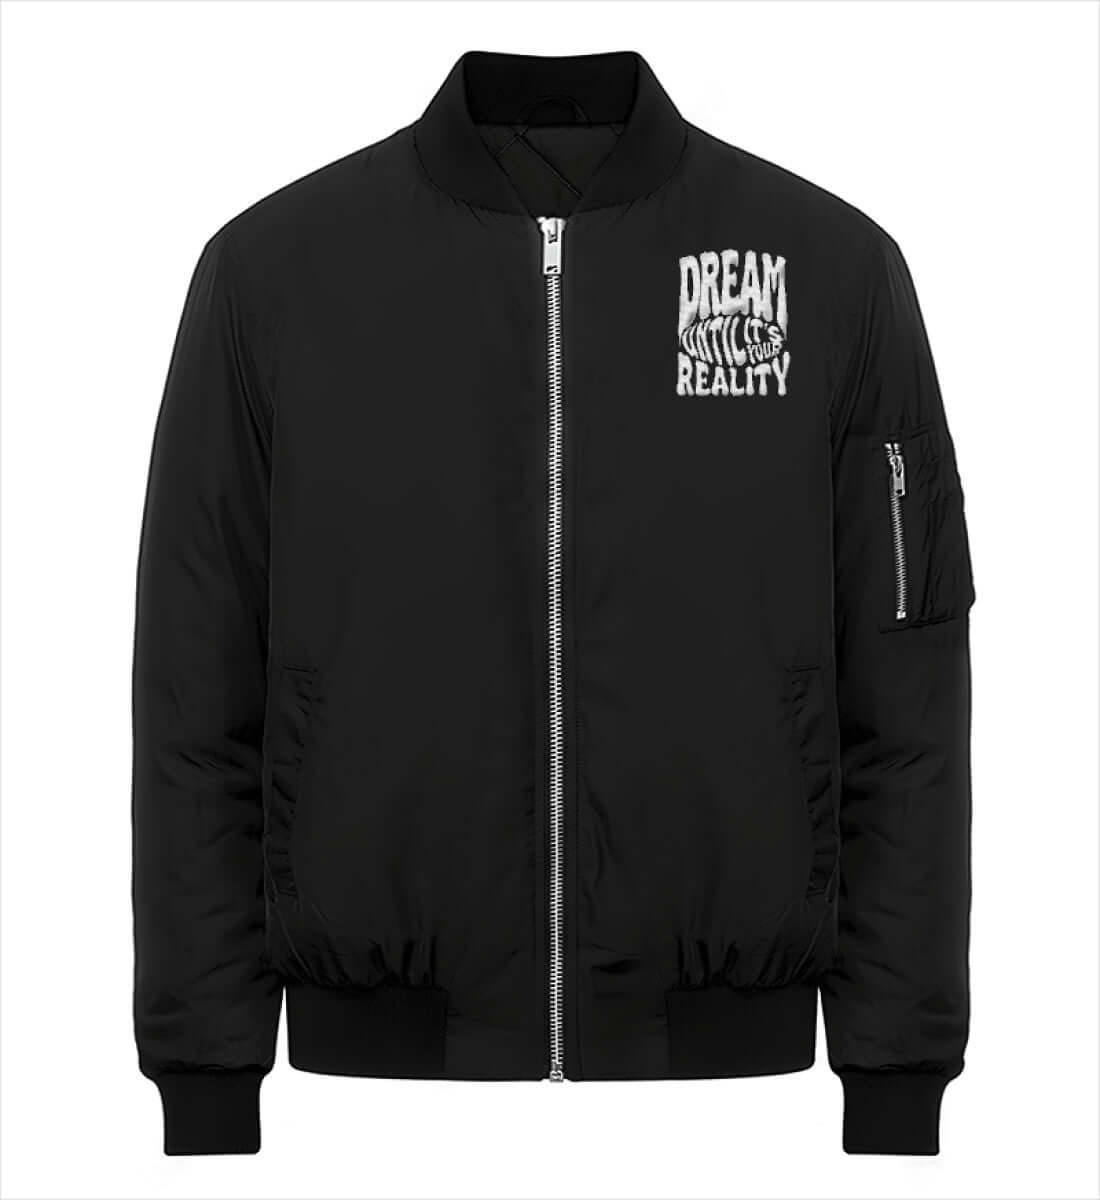 'DREAM UNTIL IT'S YOUR REALITY' BOMBERJACKET